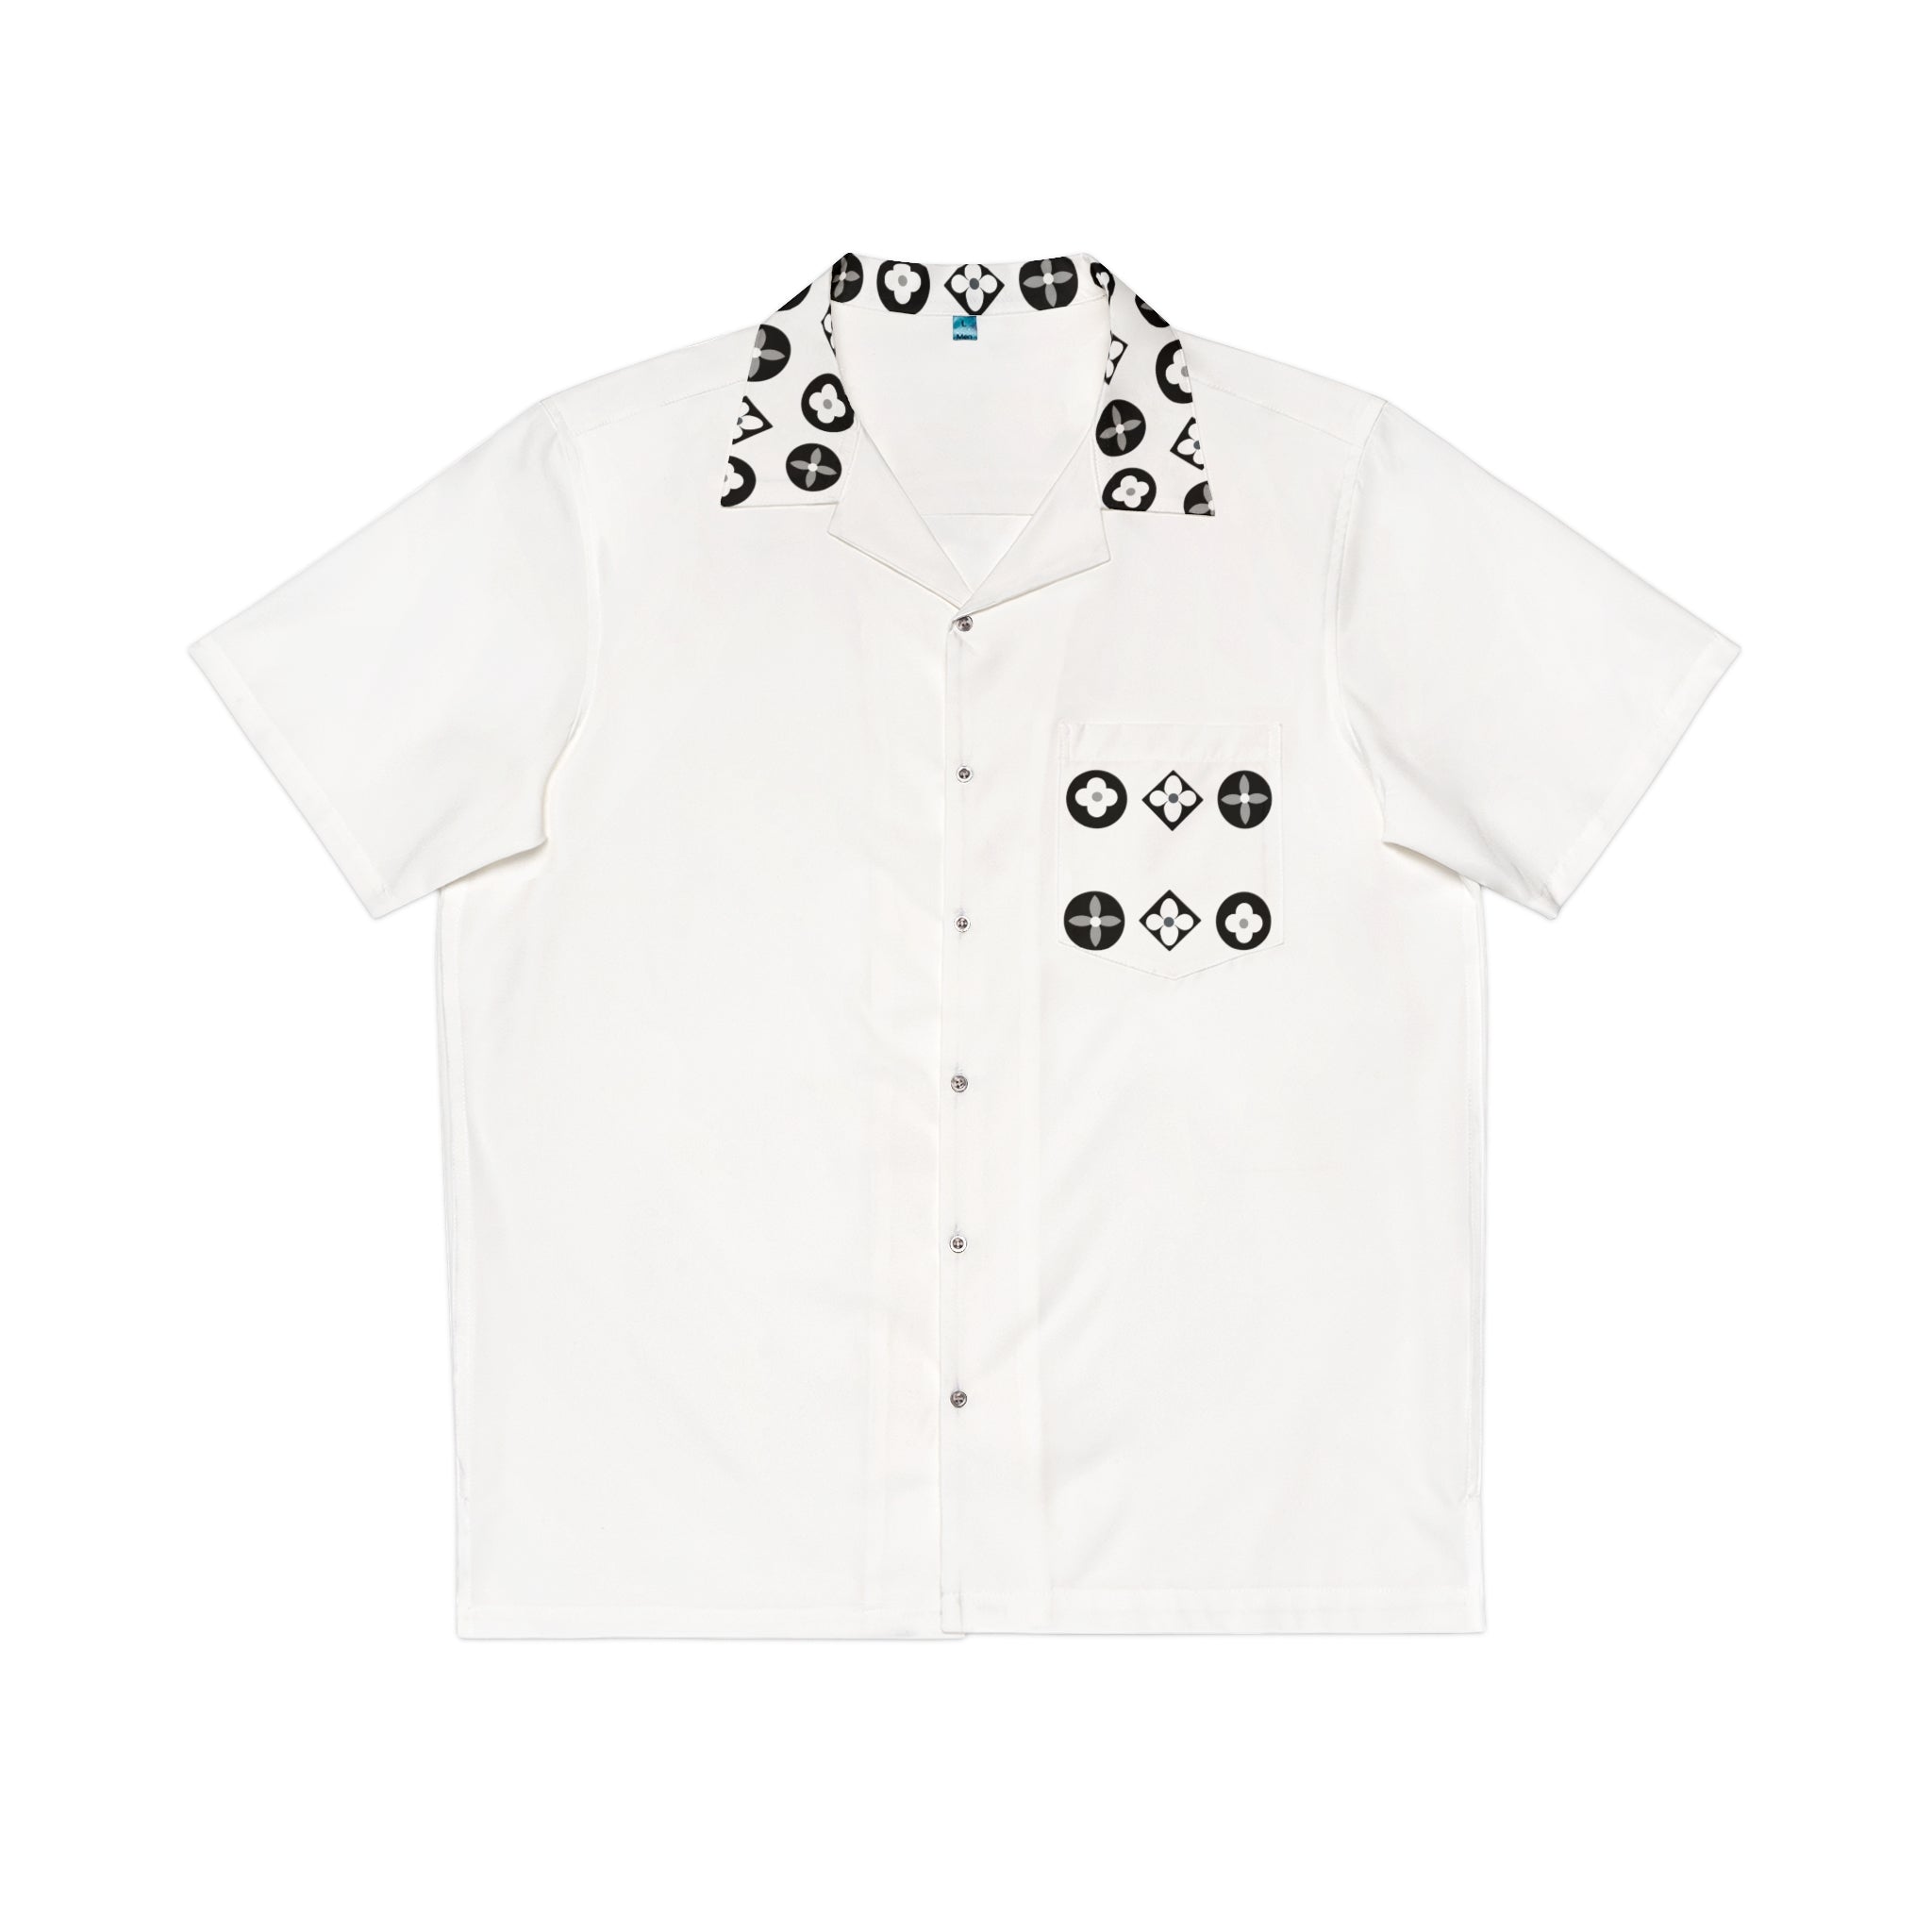 Groove Collection Trilogy of Icons Pocket Grid (Black, White) White Unisex Gender Neutral Button Up Shirt, Hawaiian Shirt